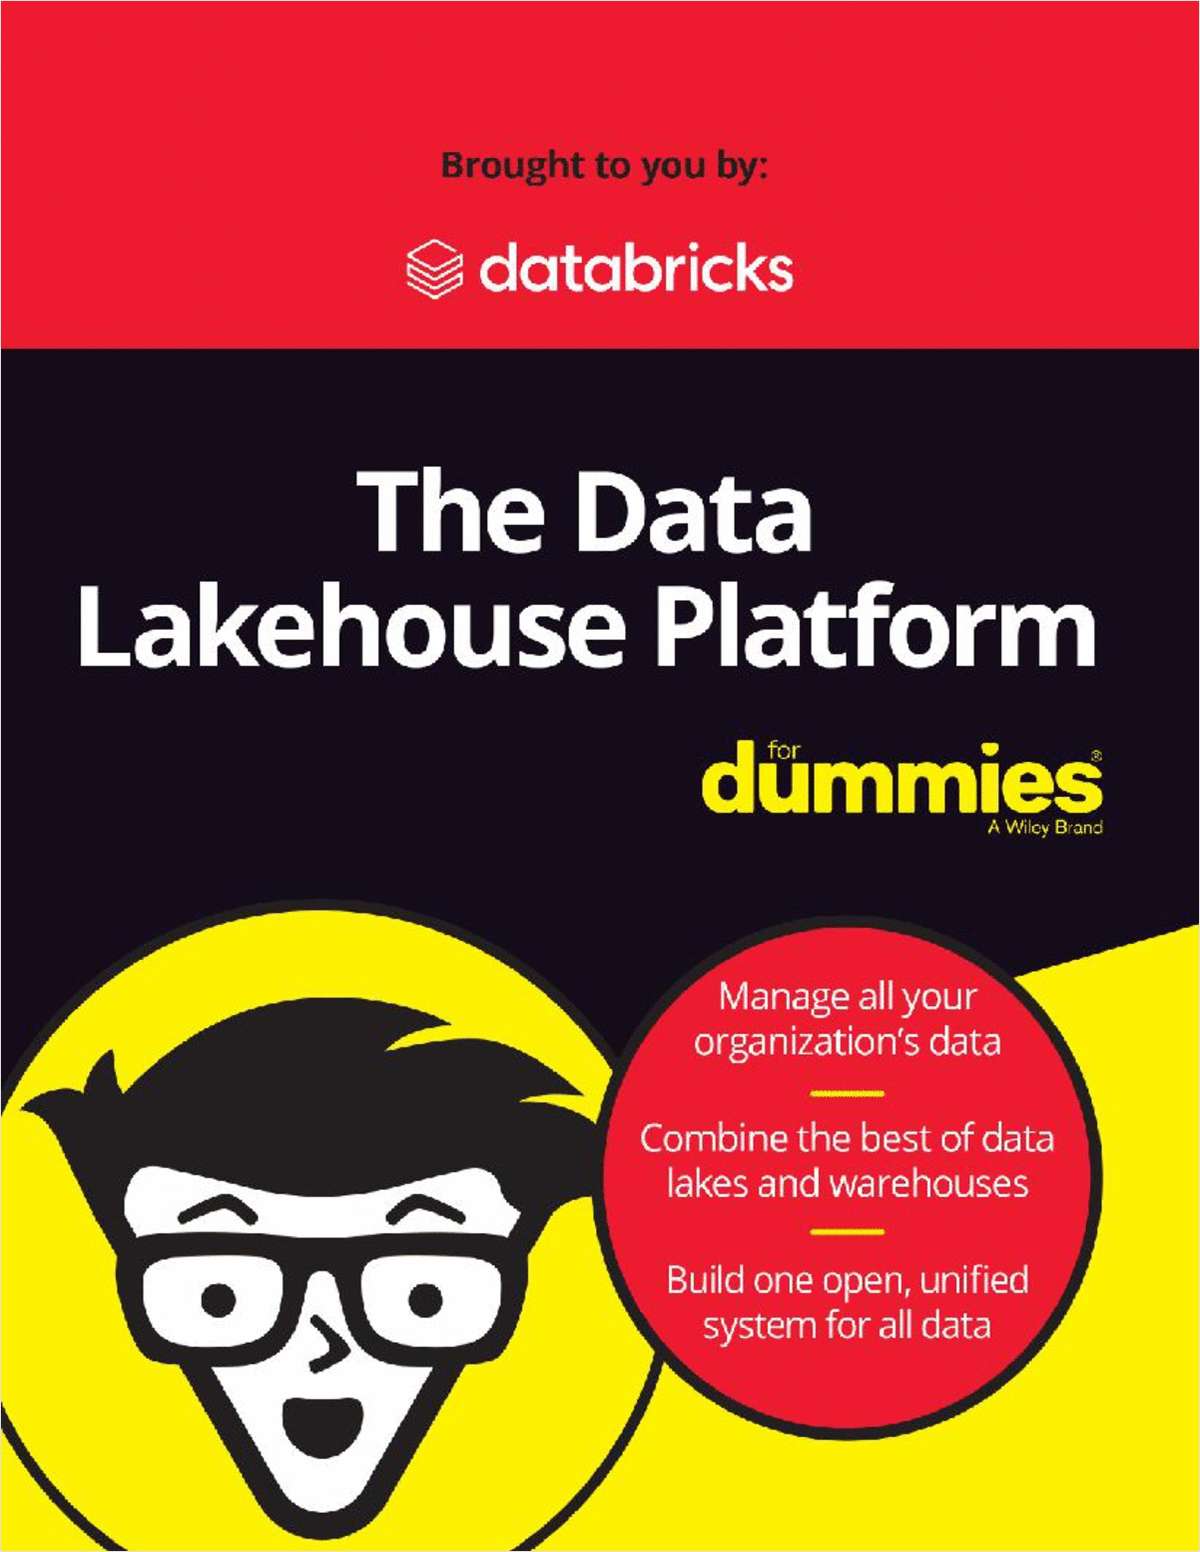 Future-proof your data strategy with Lakehouse